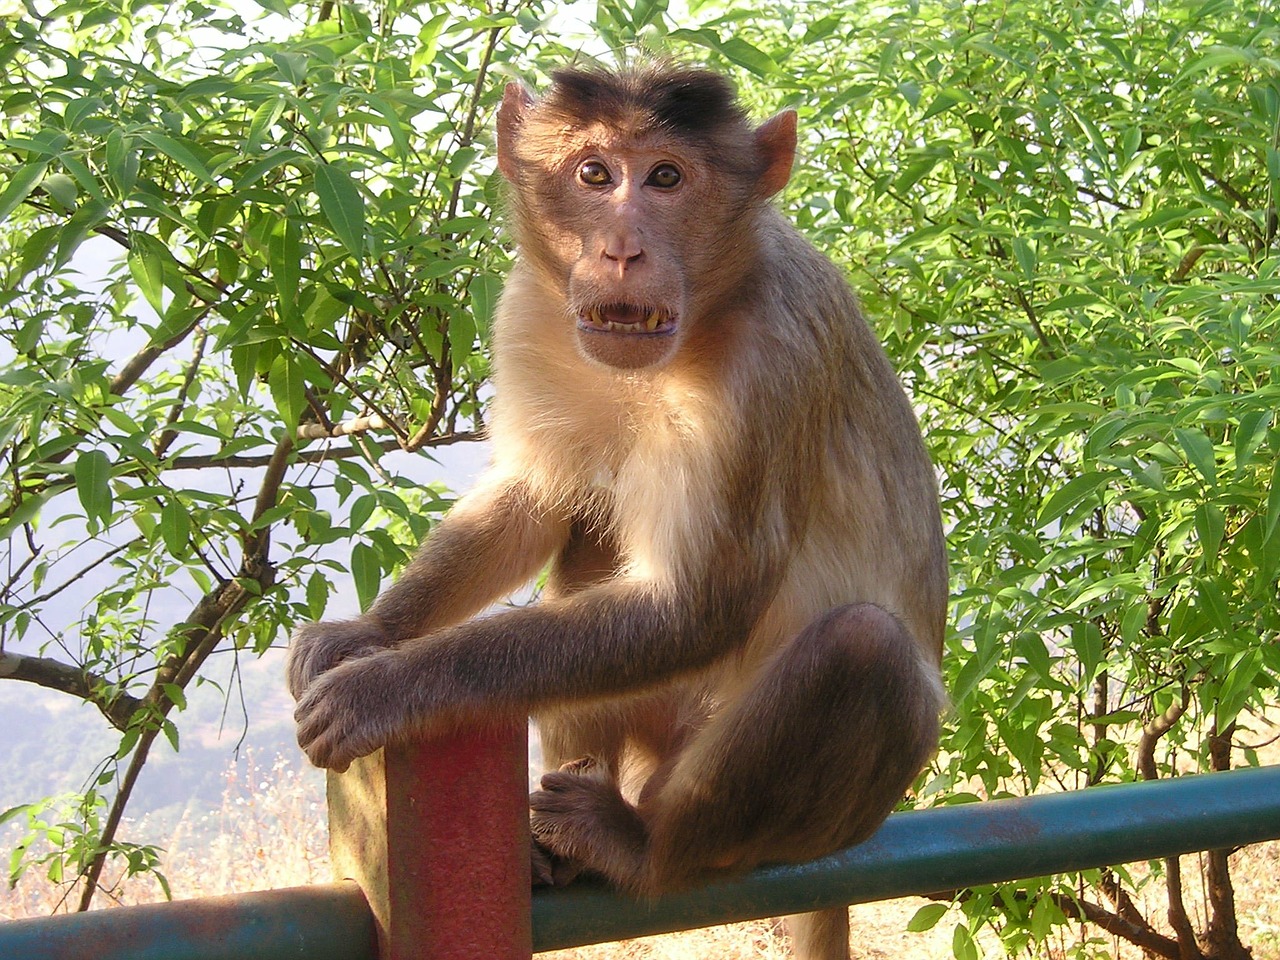 india,monkey,wild,free pictures, free photos, free images, royalty free, free illustrations, public domain